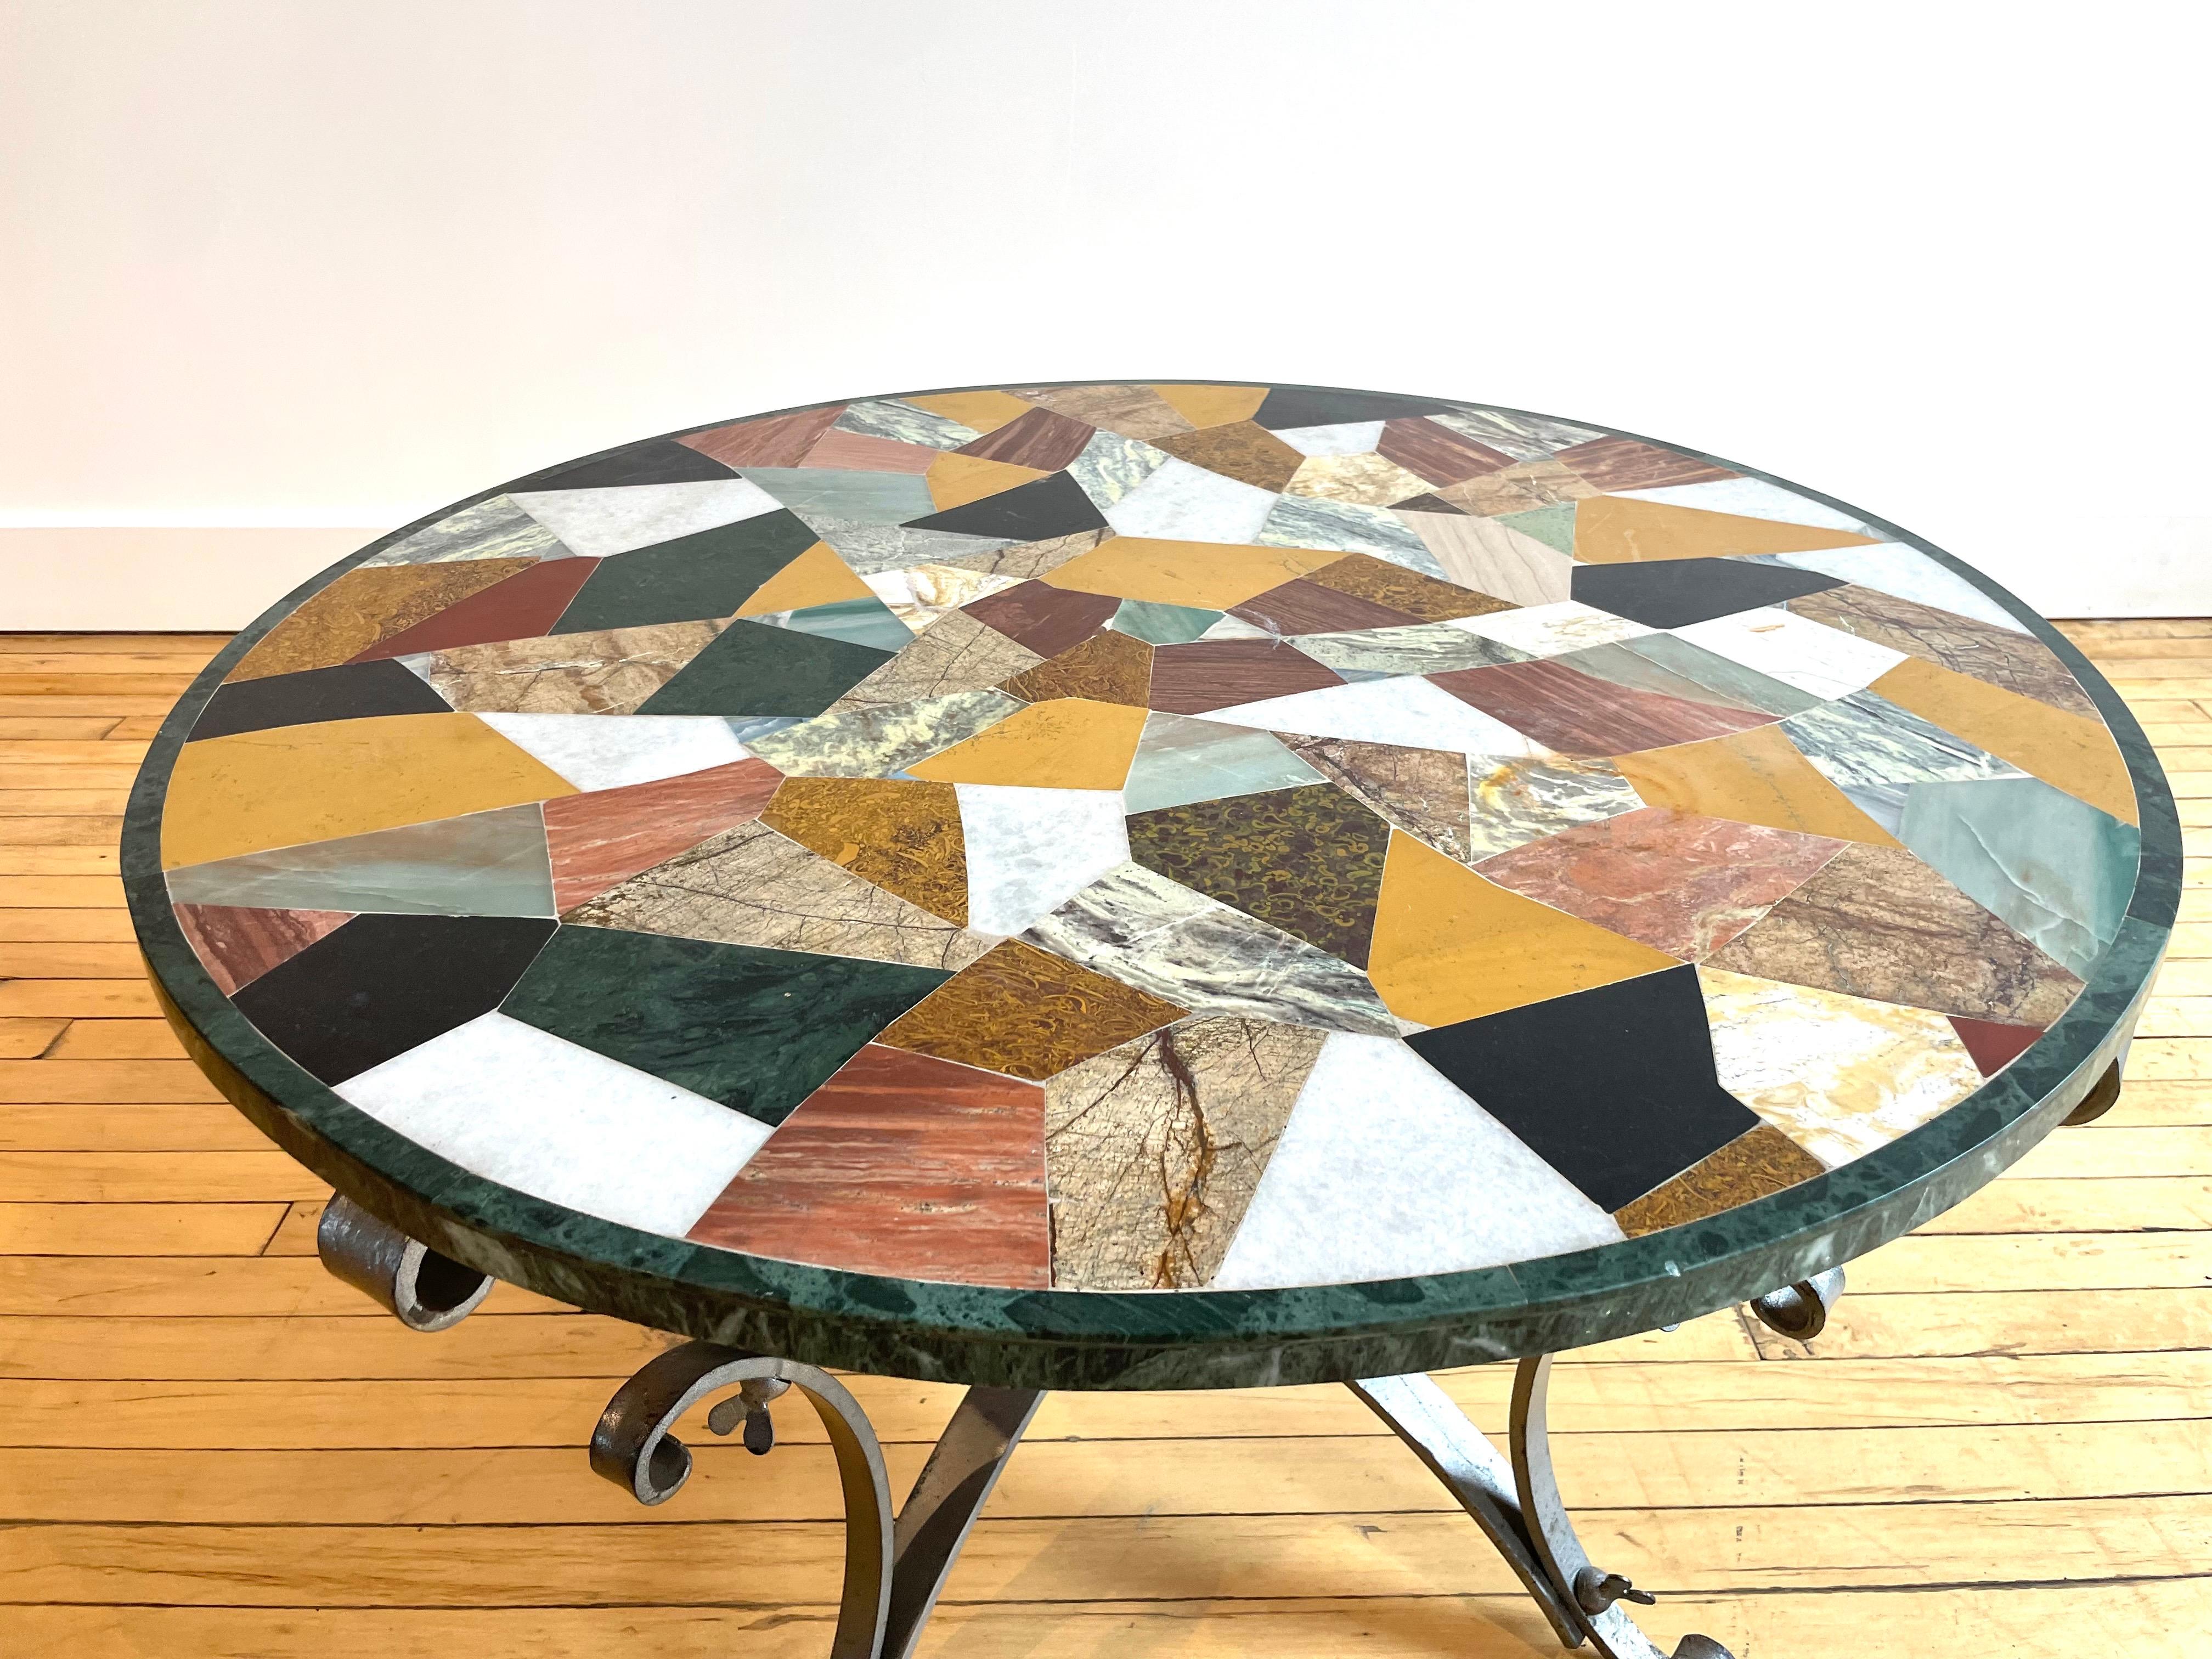 An incredible statement piece coffee table. The designer and manufacturer are both unknown, however what is absolutely knowable is the remarkable beauty of this item! 

Here we have something truly hard to find. This vintage mosaic table is simply